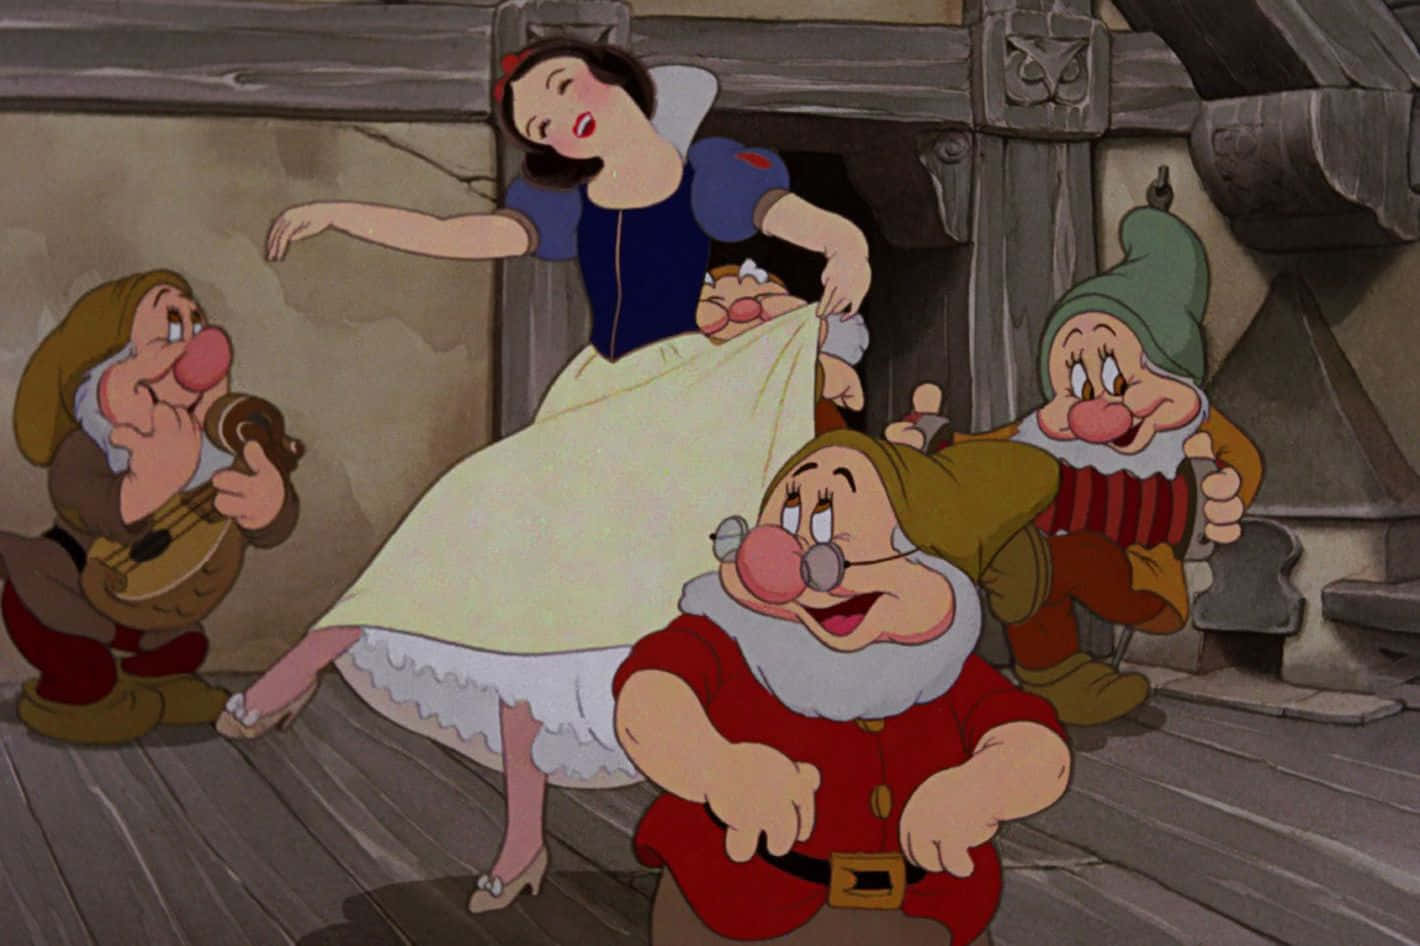 Snow White with the enchanted forest dwarfs